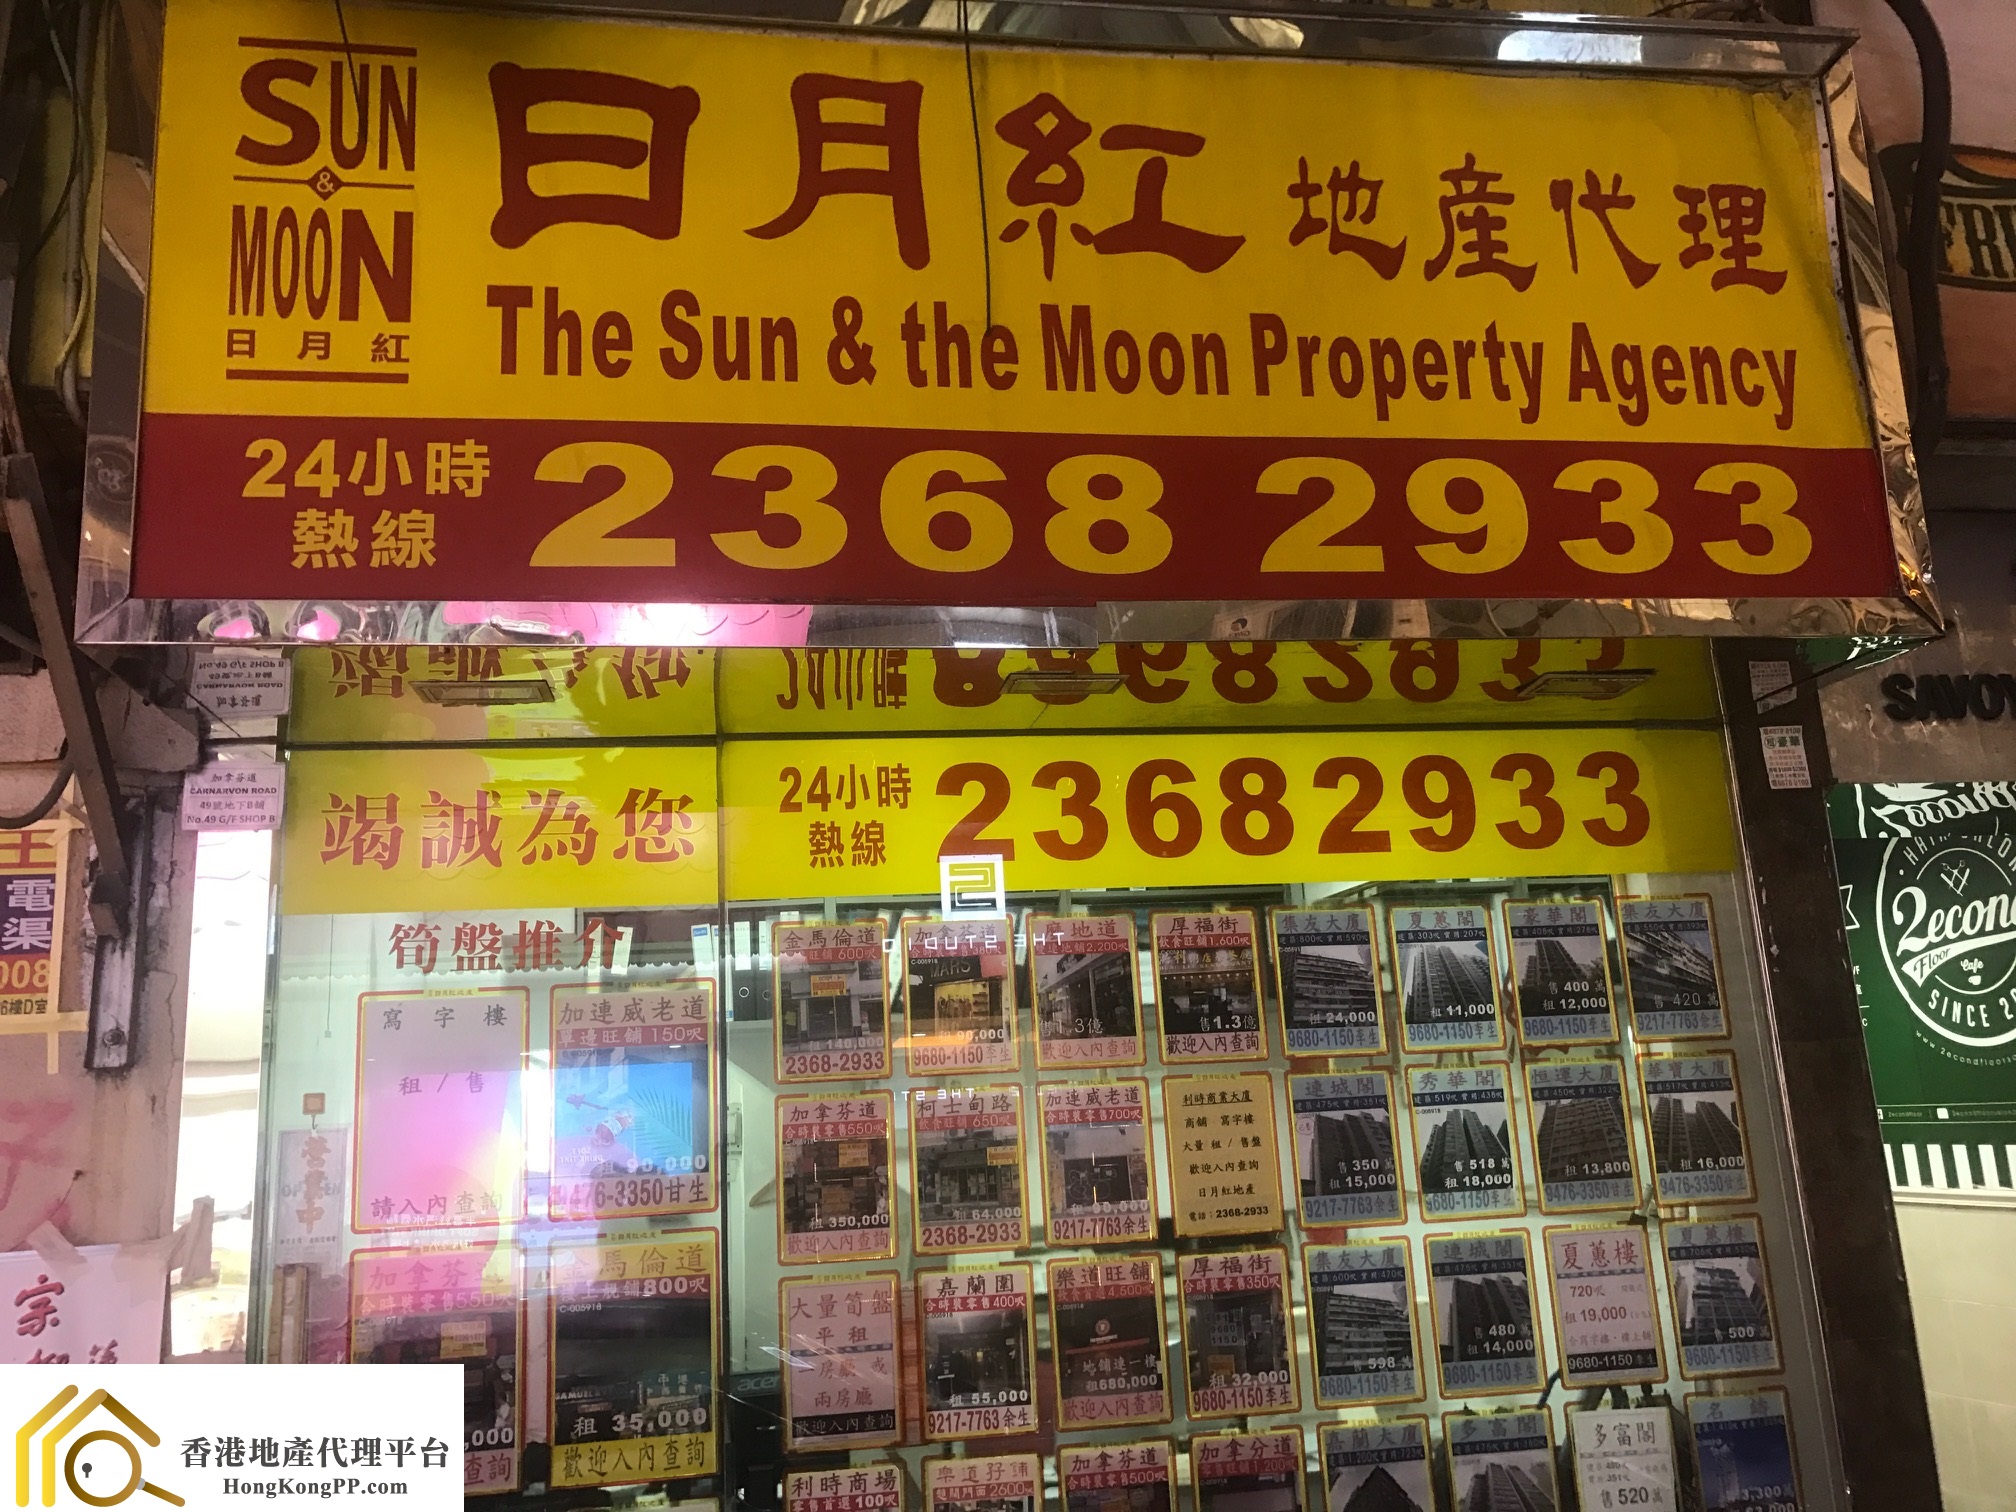 ShopEstate Agent: 日月紅地產代理 The Sun & the Moon Property Agency